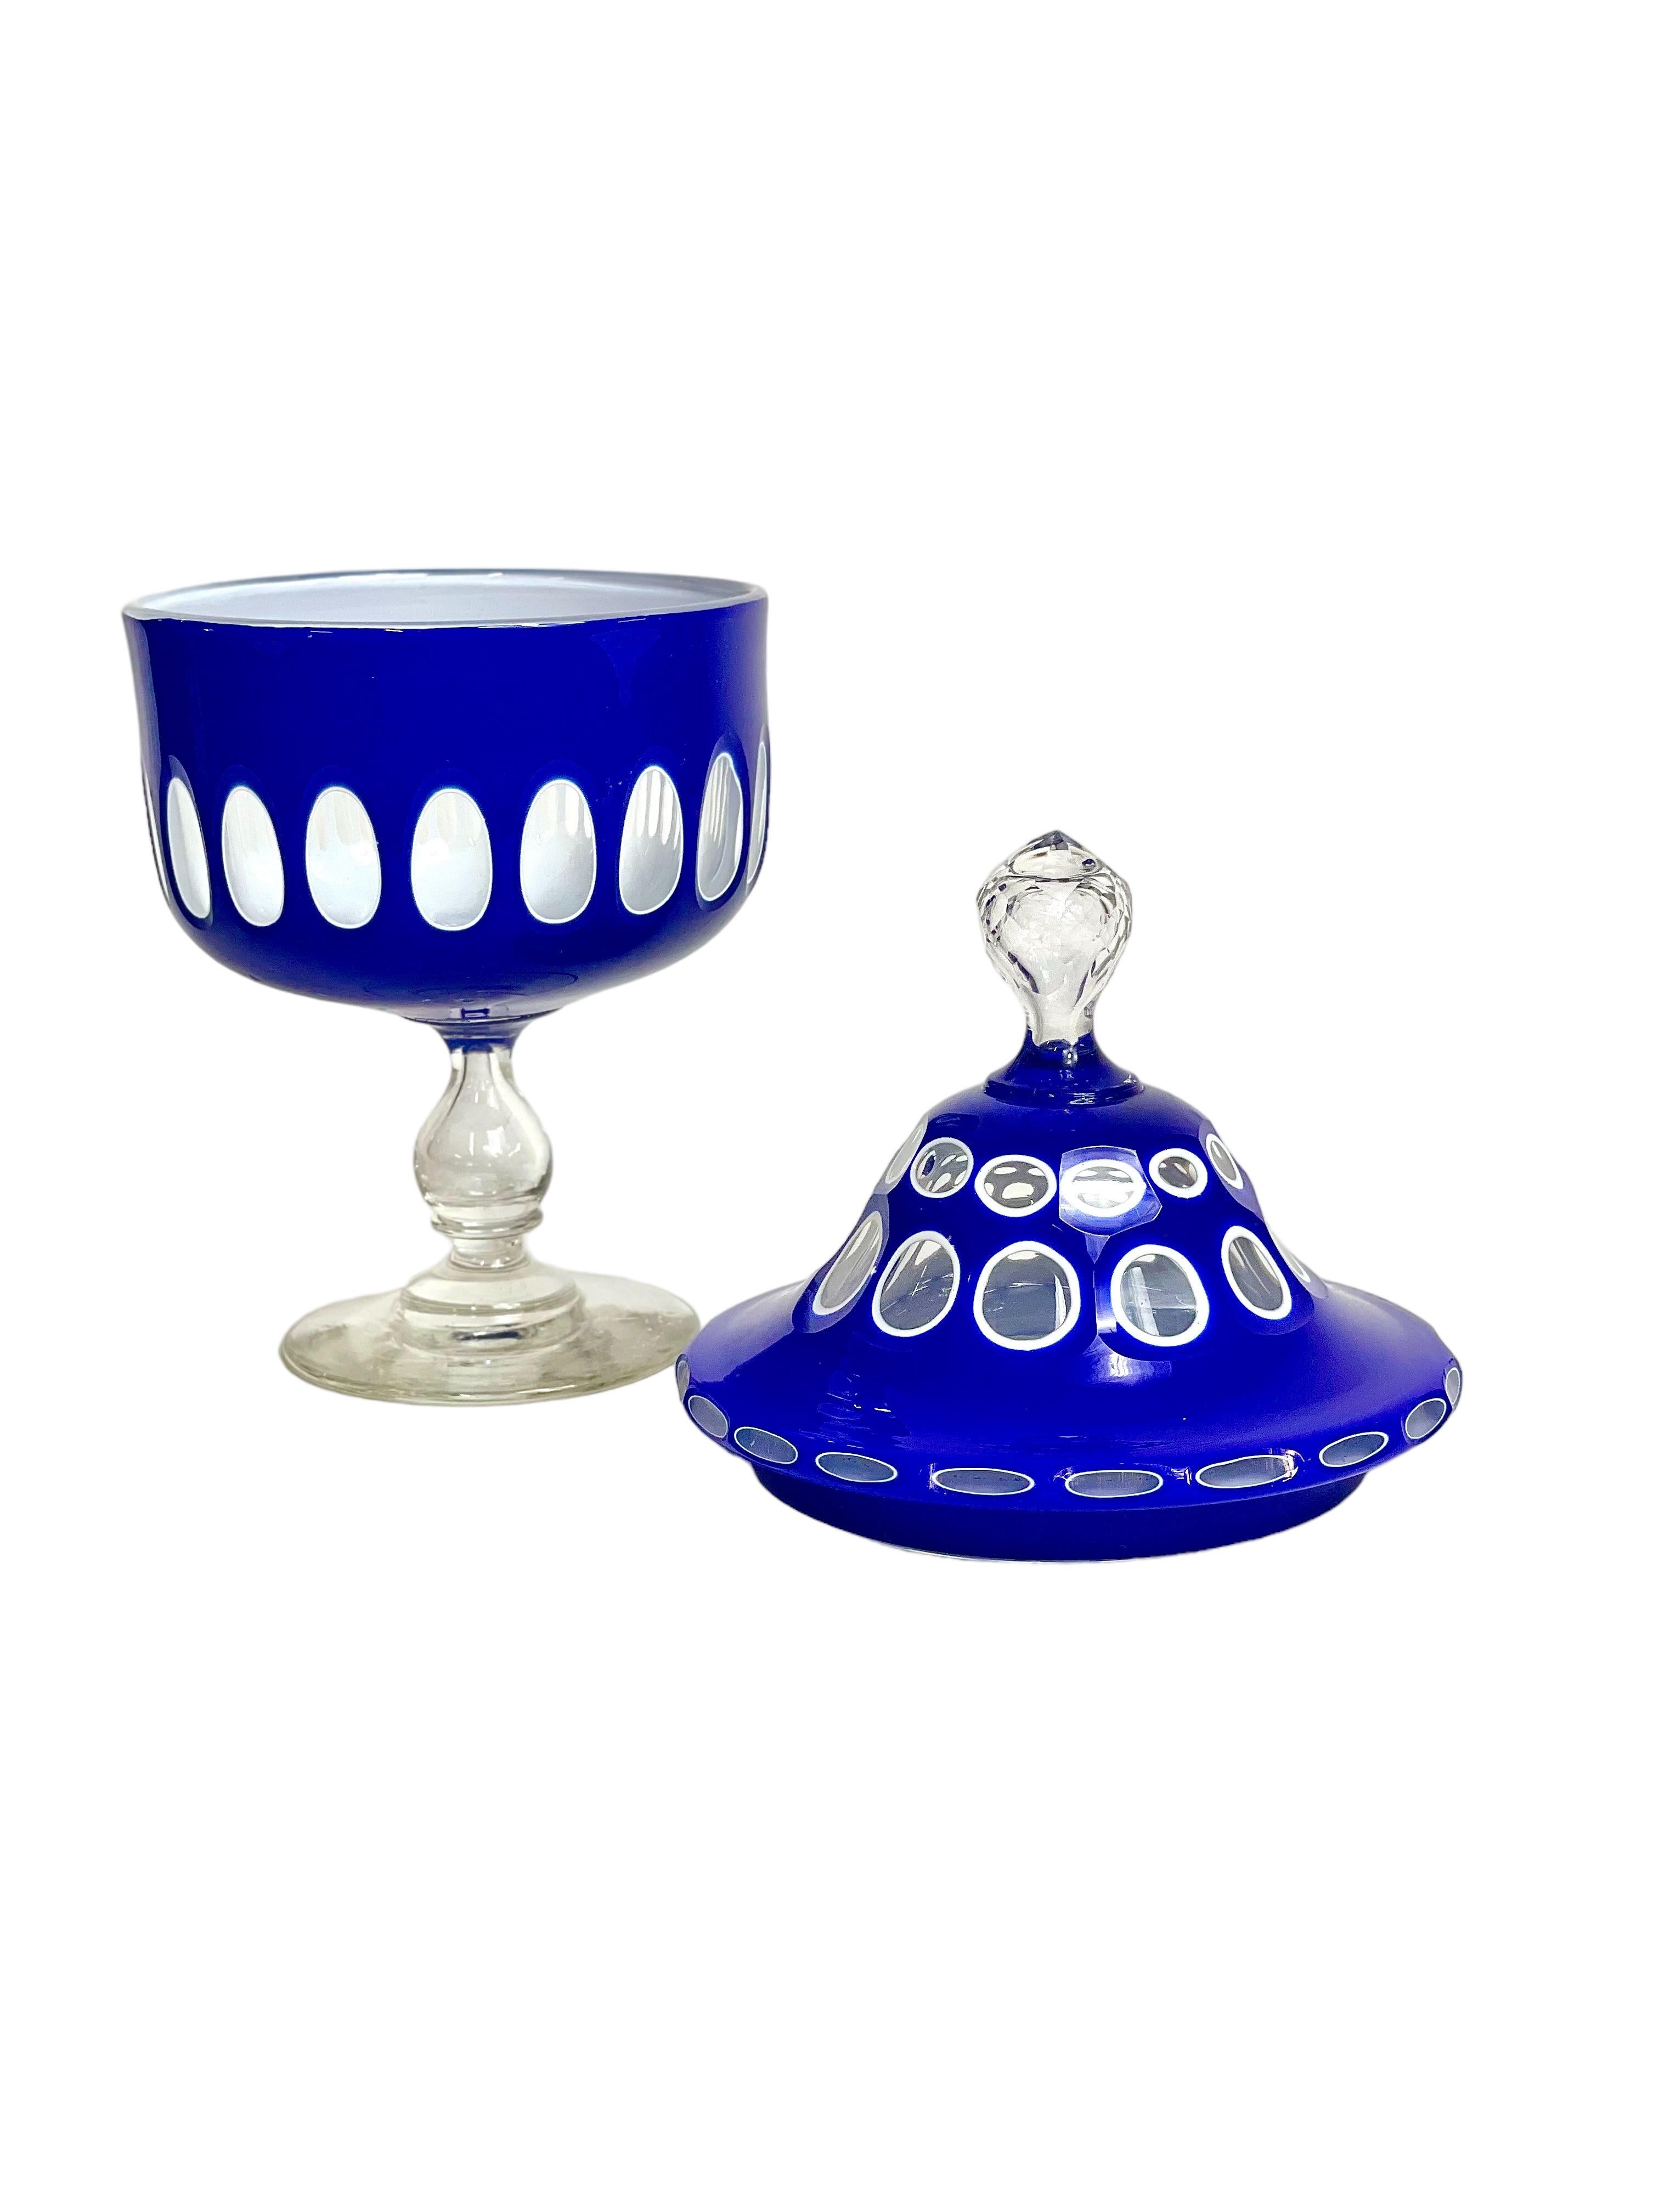 An unusual cobalt-blue or Overlay crystal ‘drageoir’ (sweet jar), with clear pedestal and fitted lid. Dating from around the 19th century, this quirky cut-to-clear overlaid container, decorated all round with clear cut-out circular windows, would